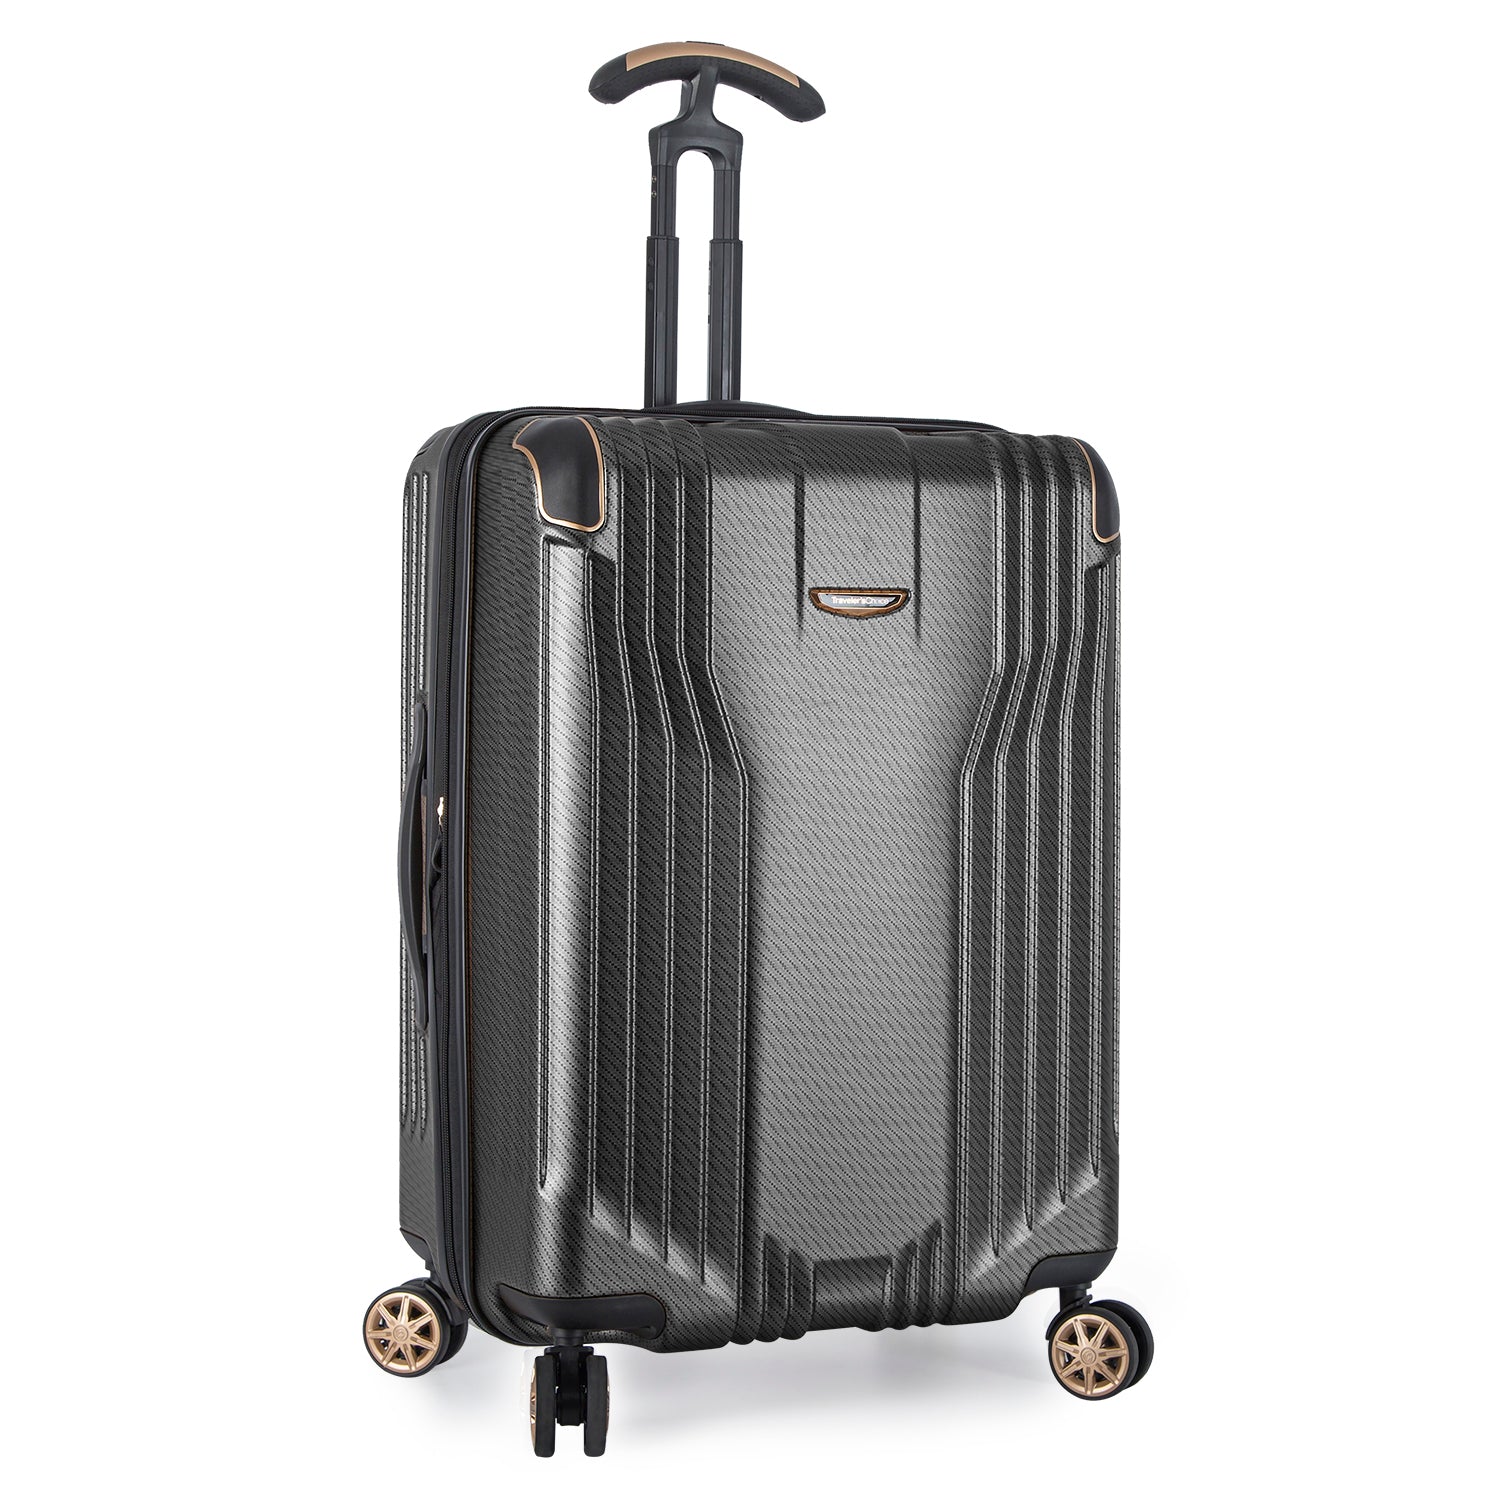 Continent Adventurer Medium Checked Luggage Suitcase with 4 Spinner Wheels